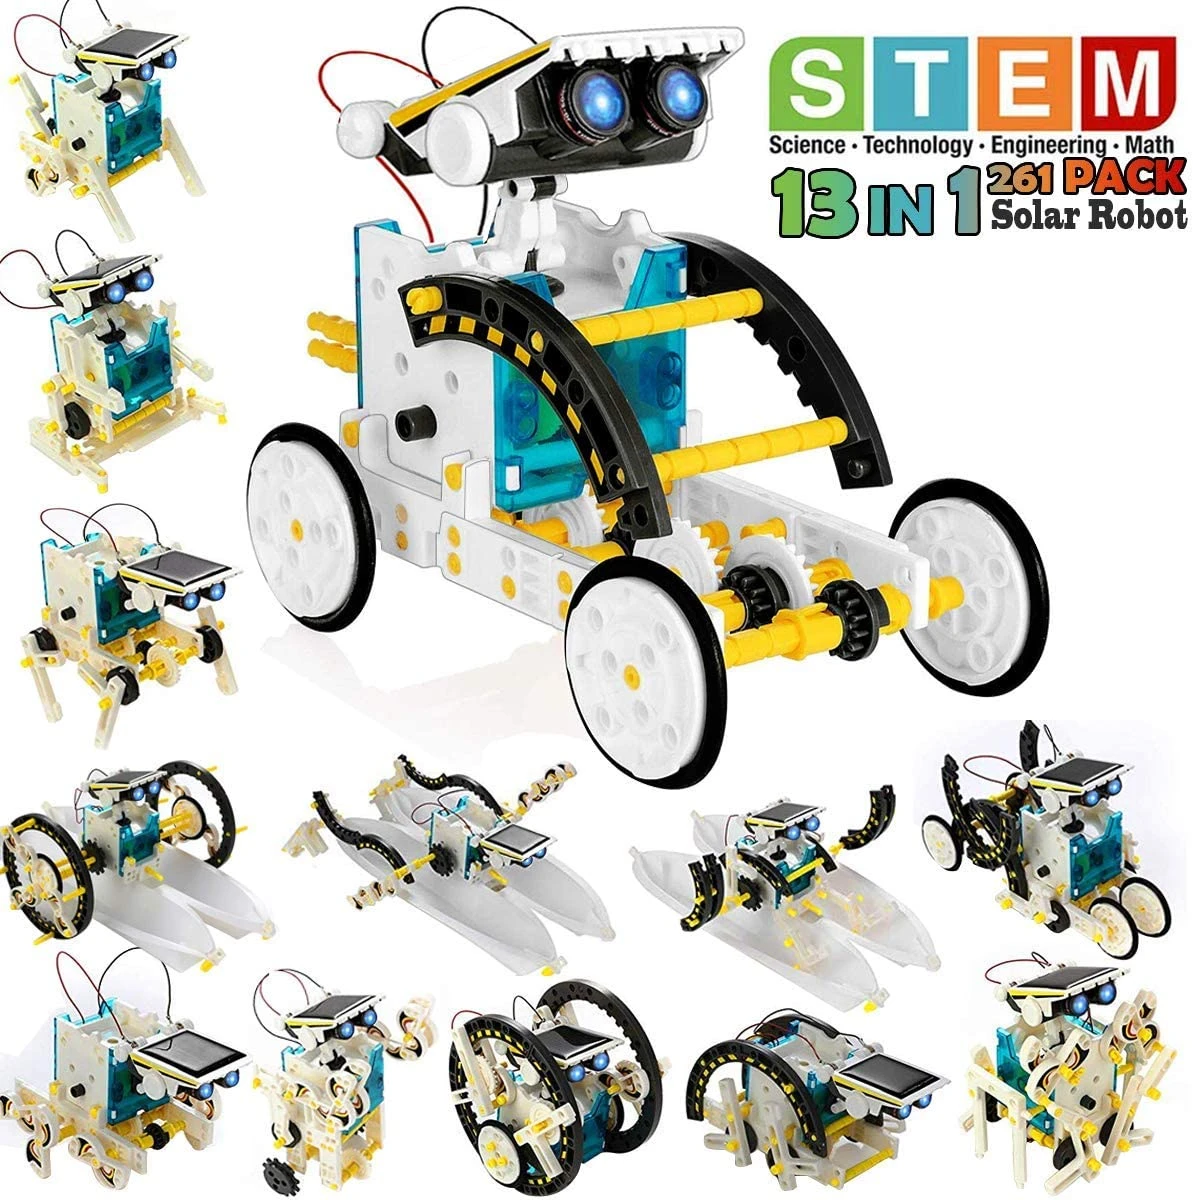 13 in 1 Solar Powered Robot DIY Transformer Toy Educational Science Kit